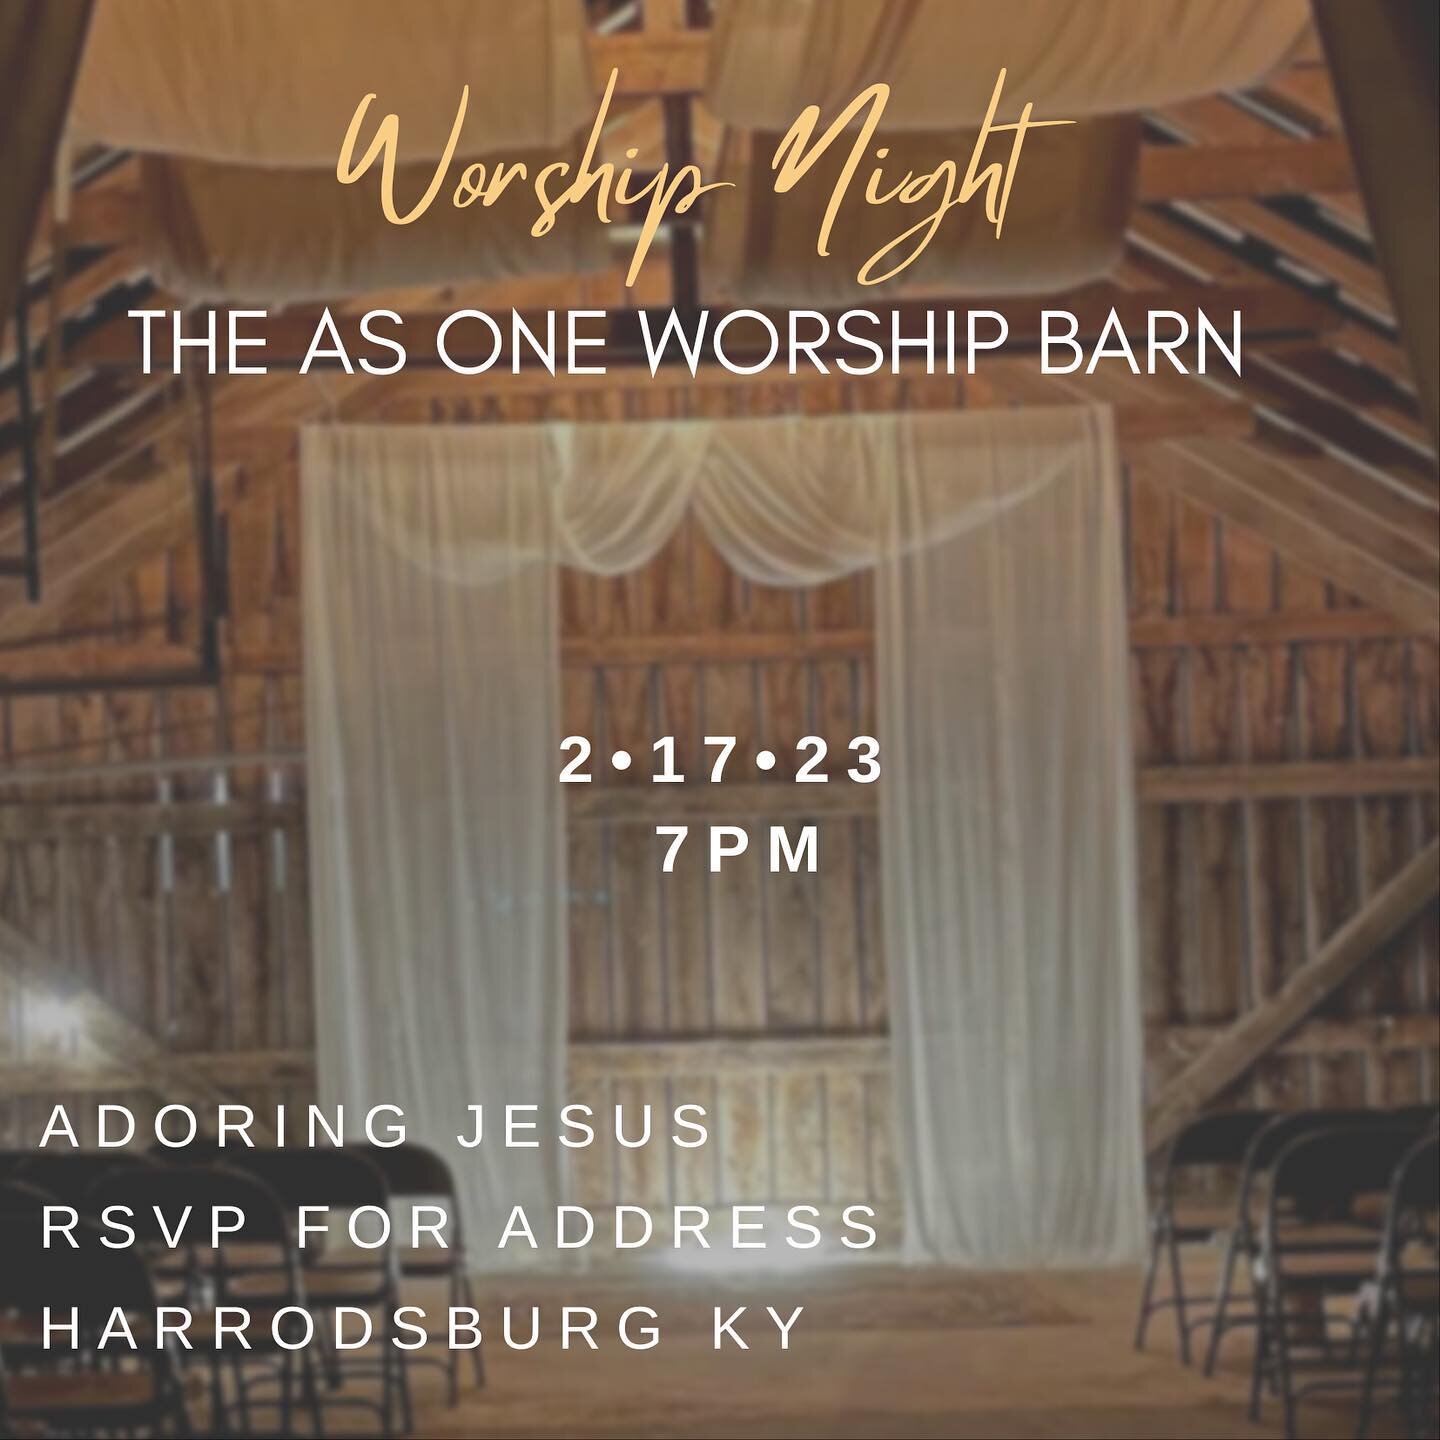 Tonight at The As One Worship Barn. 
Worship, prayer and adoration of Jesus 7pm
Prayer &amp; fellowship to follow in the cabin. ❤️
RSVP for address